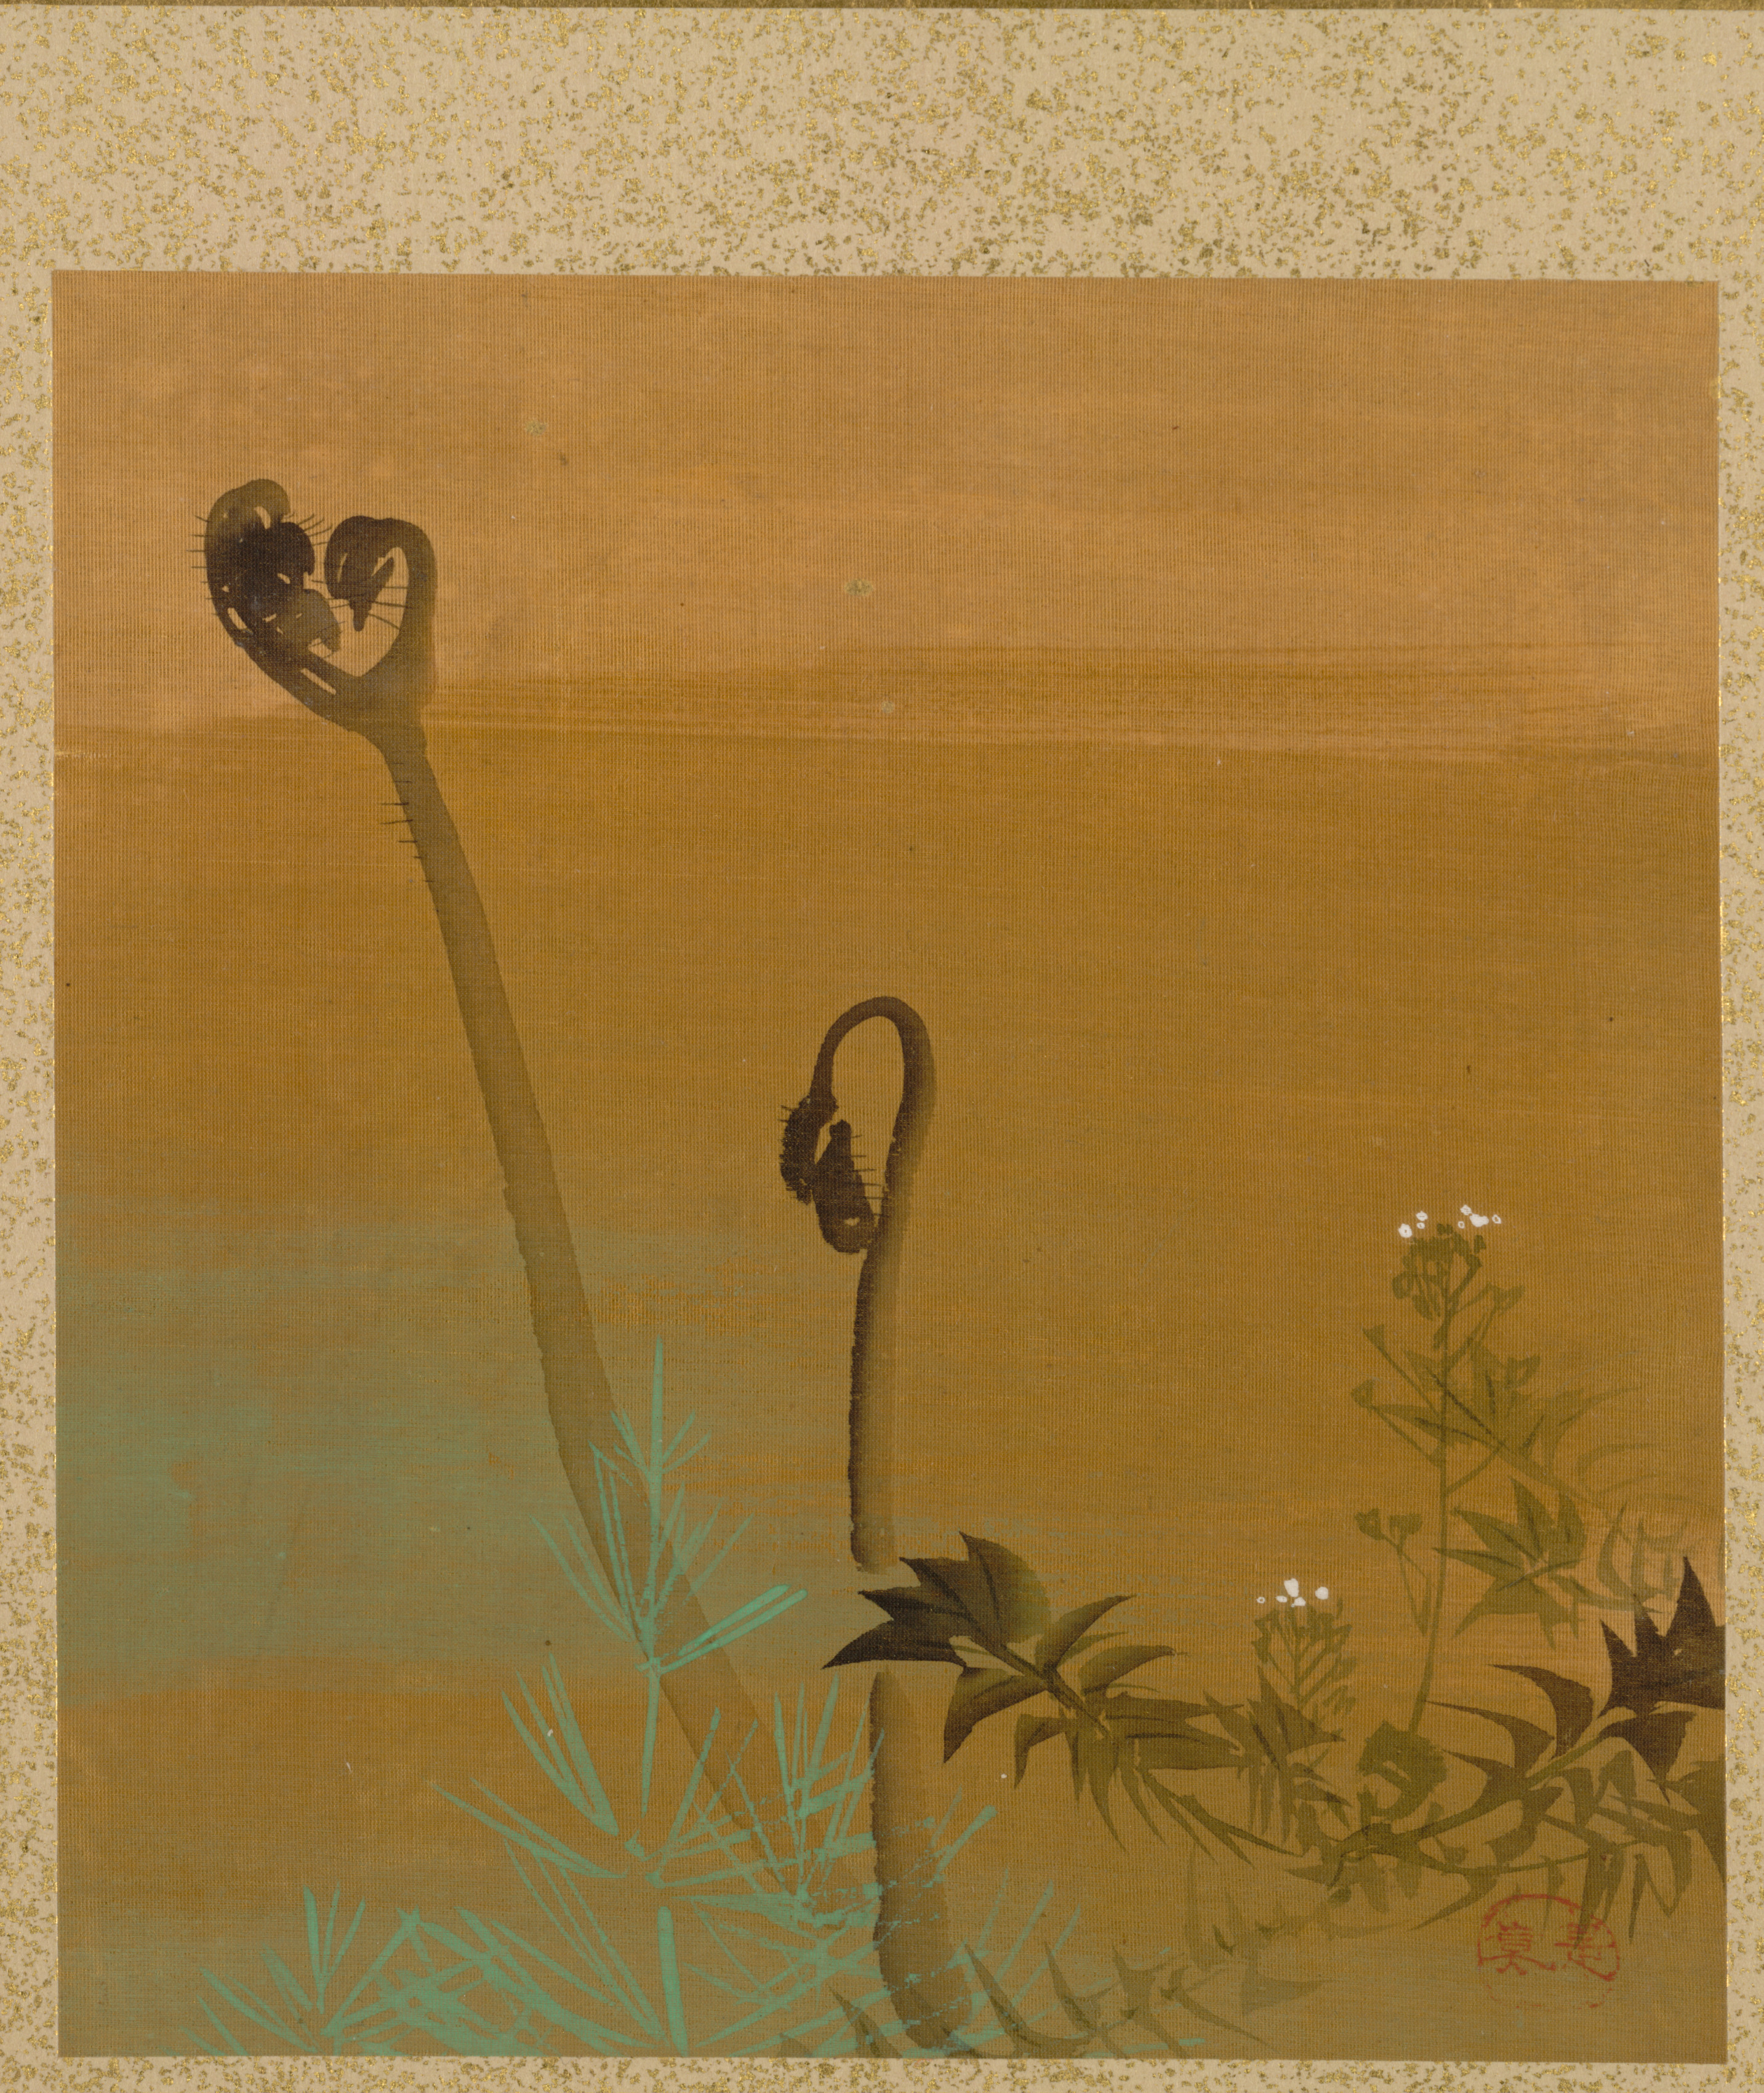 New Ferns from Album of Paintings by the Venerable Zeshin